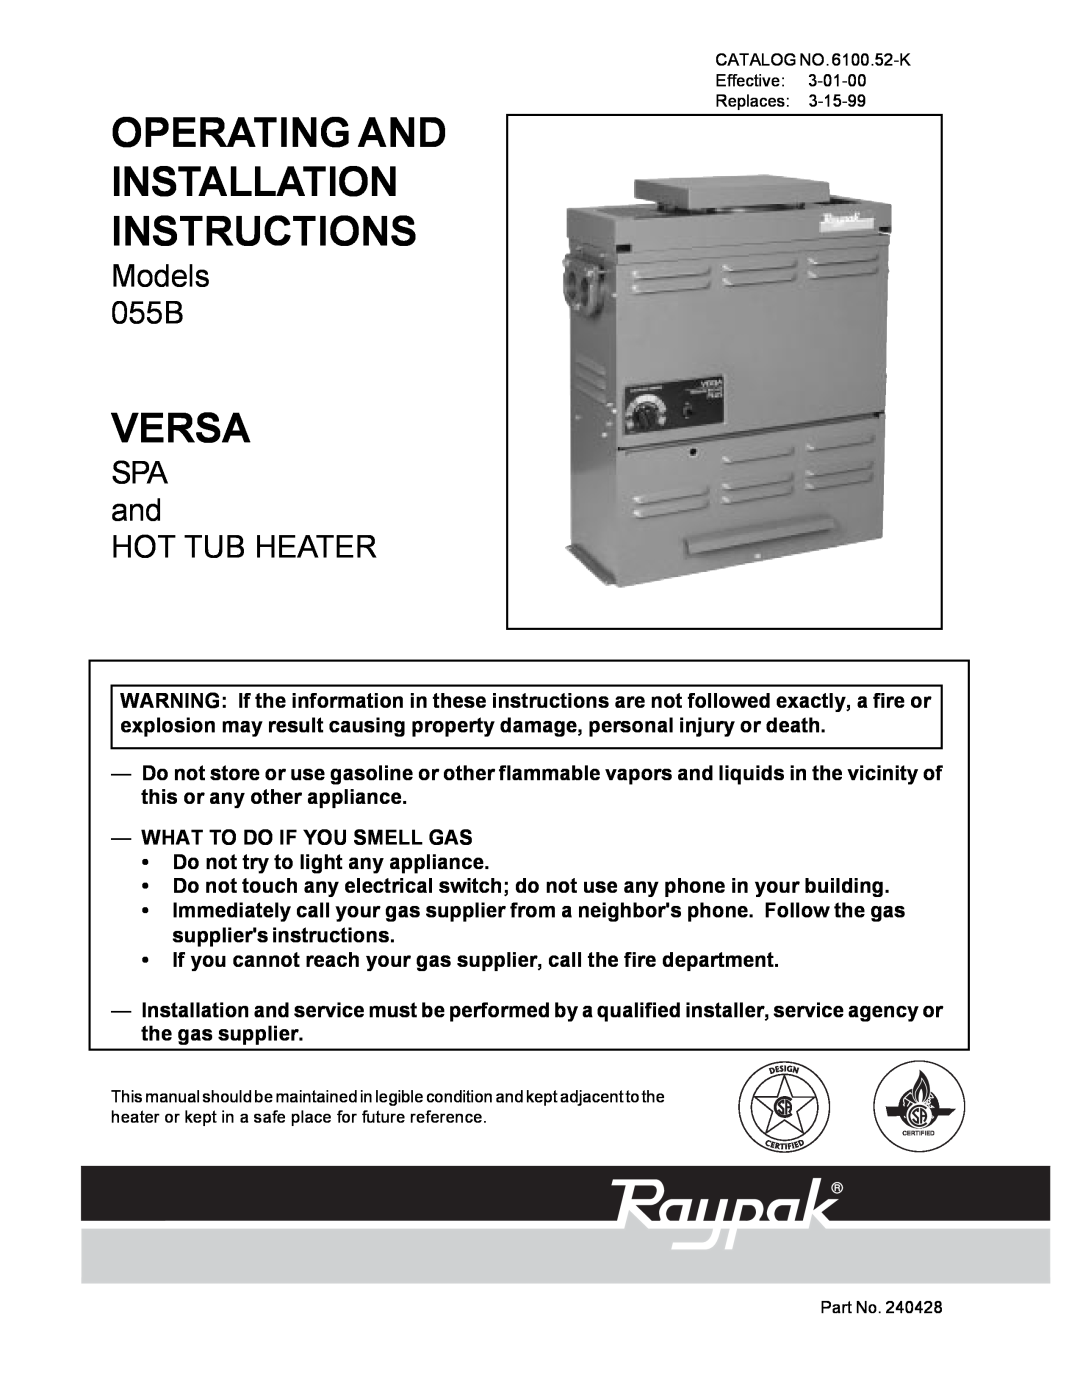 Raypak installation instructions Models 055B, SPA and HOT TUB HEATER, Operating And Installation Instructions, Versa 